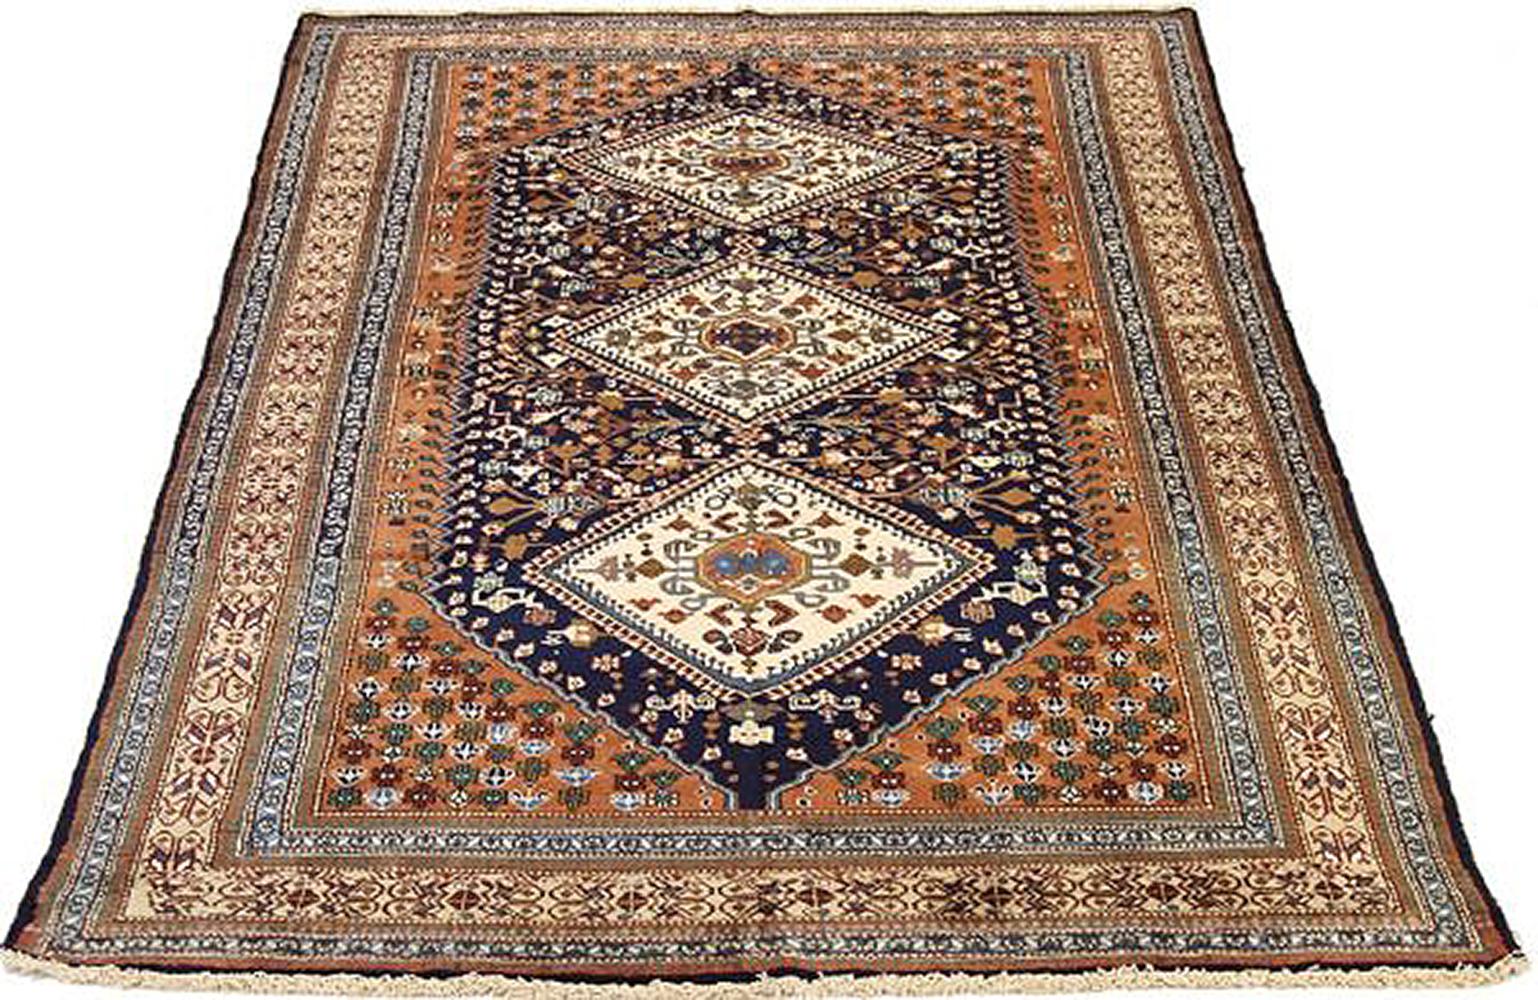 Vintage Persian rug handwoven from the finest sheep’s wool and colored with all-natural vegetable dyes that are safe for humans and pets. It’s a traditional Ardebil design featuring ivory and brown diamond medallions on a navy and beige field. It’s